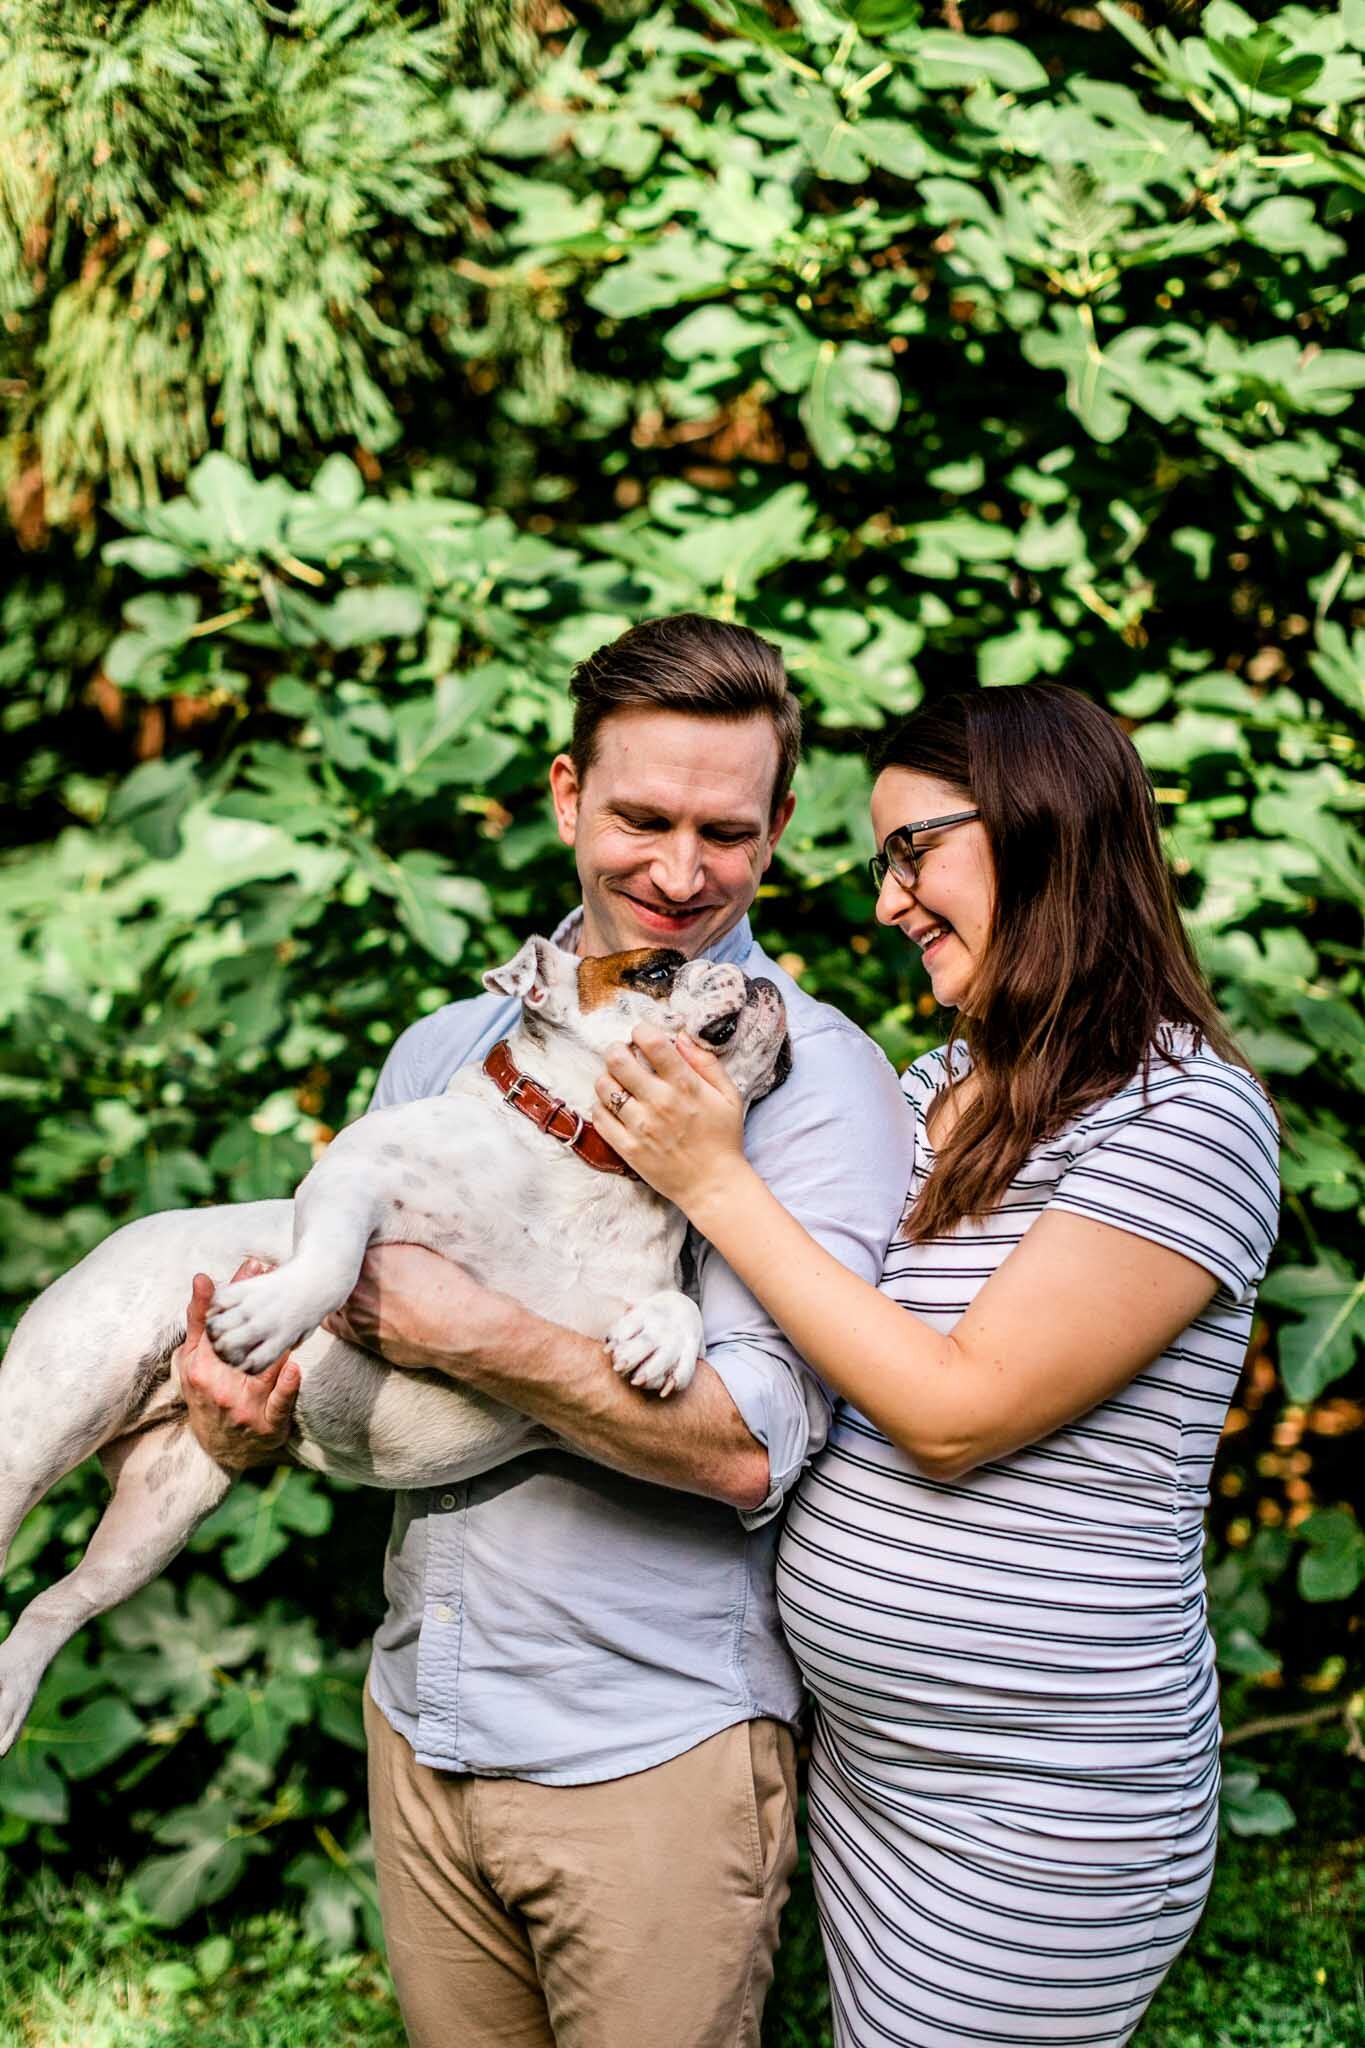 Durham Maternity Photographer | By G. Lin Photography | Couple laughing and playing with bulldog